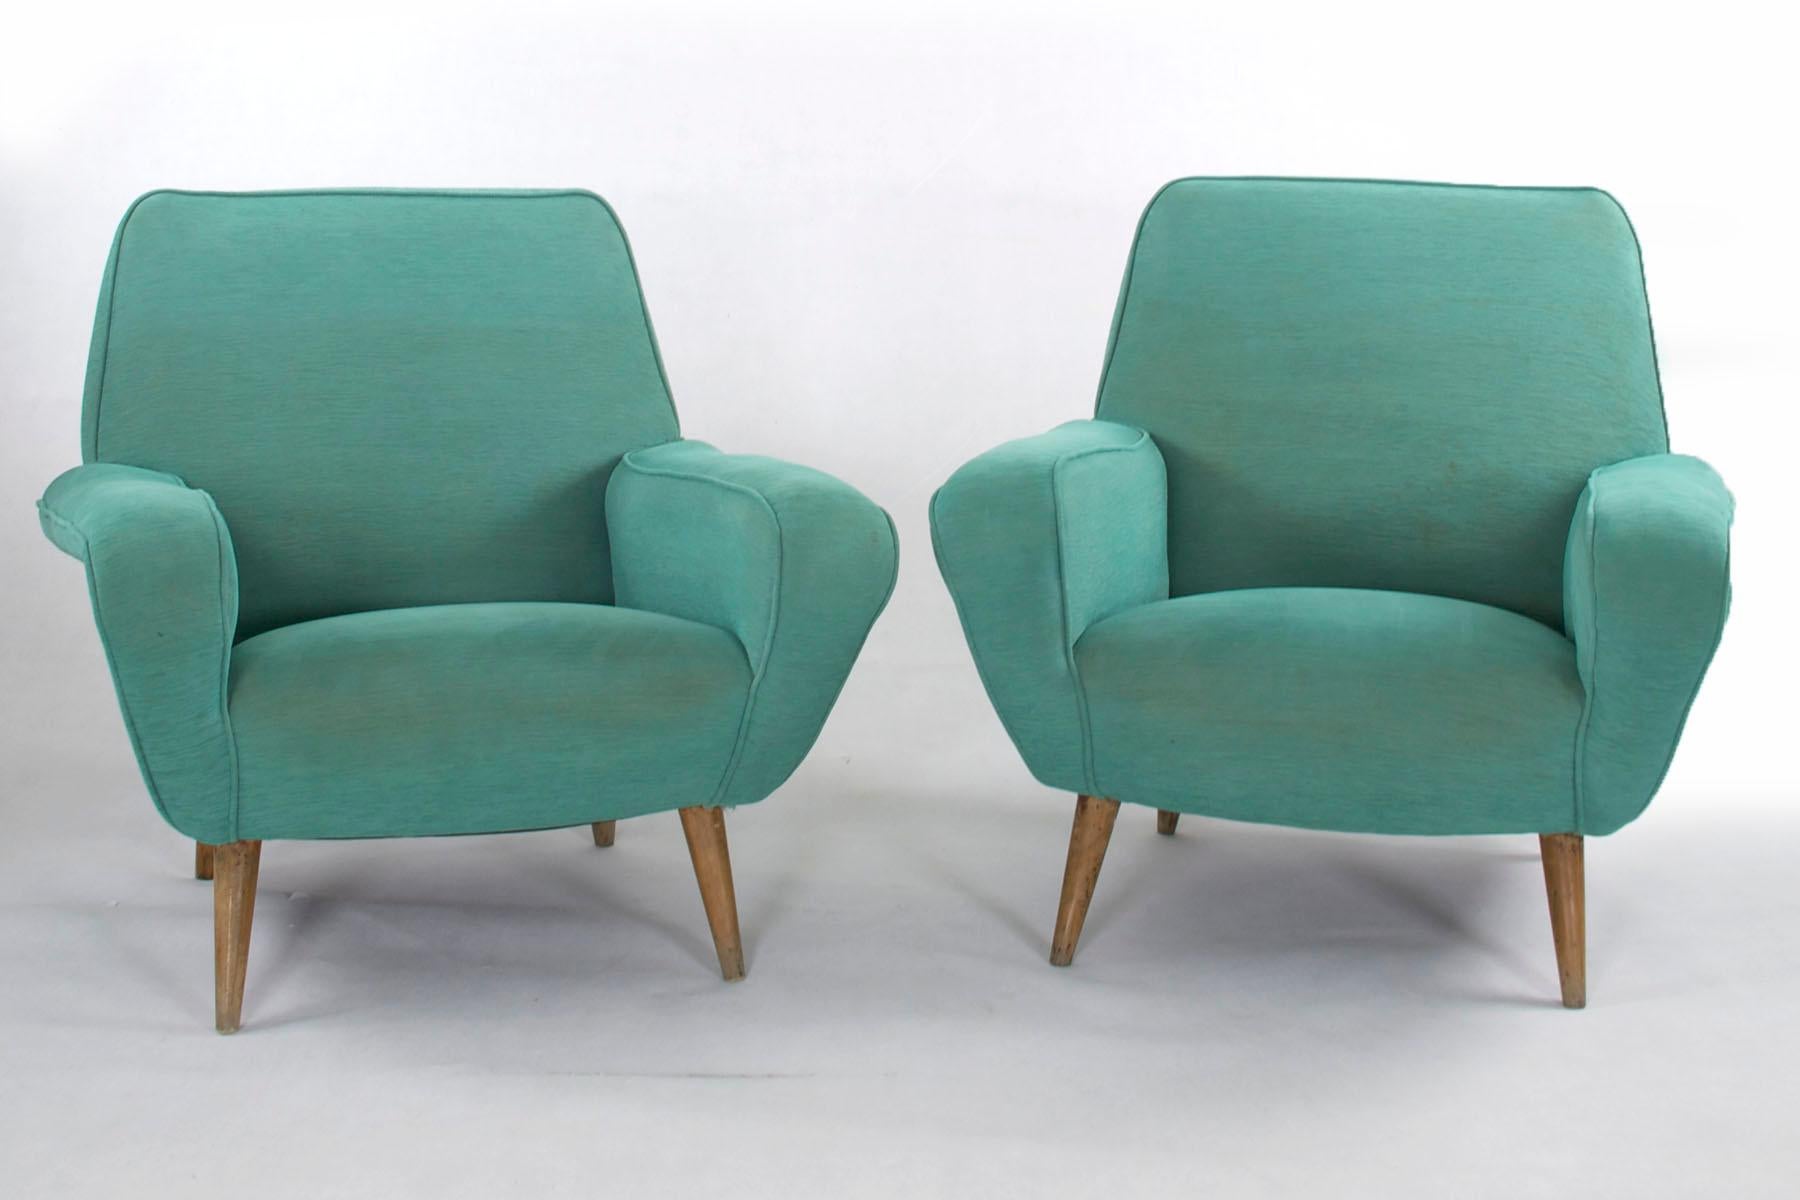 Fabric Set of 2 Gianfranco Frattini Chairs Modell 830, 1950s, Cassina, Italy For Sale